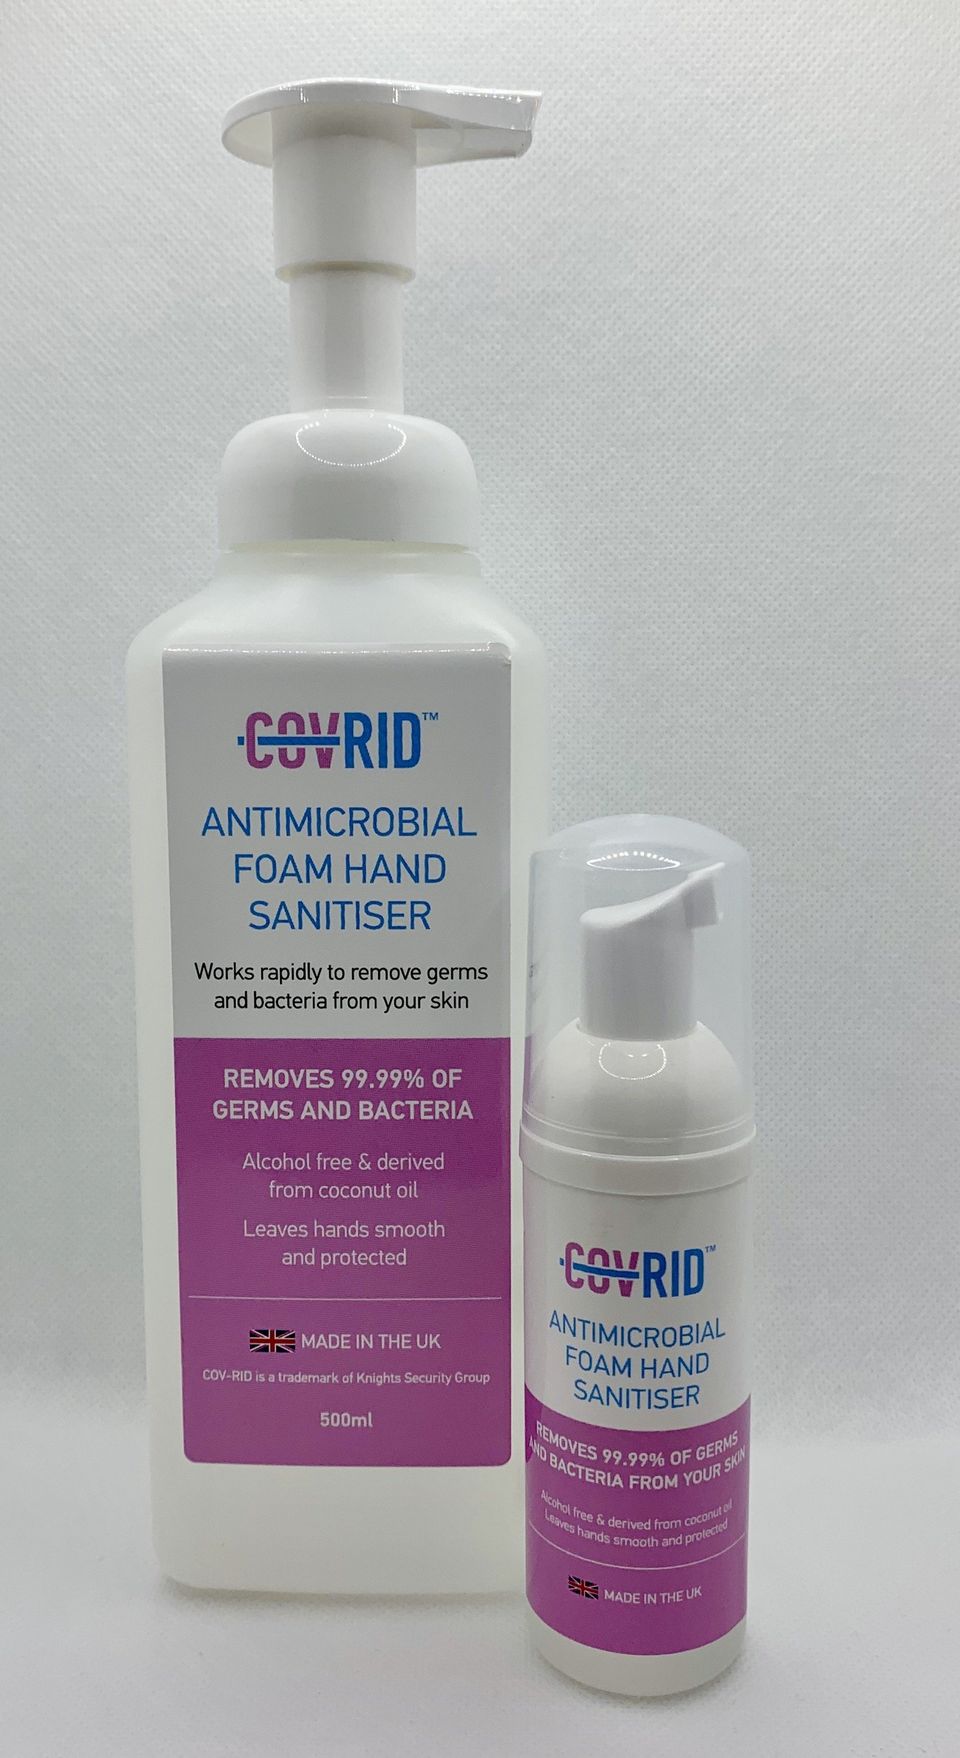 COV-RID Antimicrobial Foaming Hand Sanitiser 500ml and 50ml Bottles